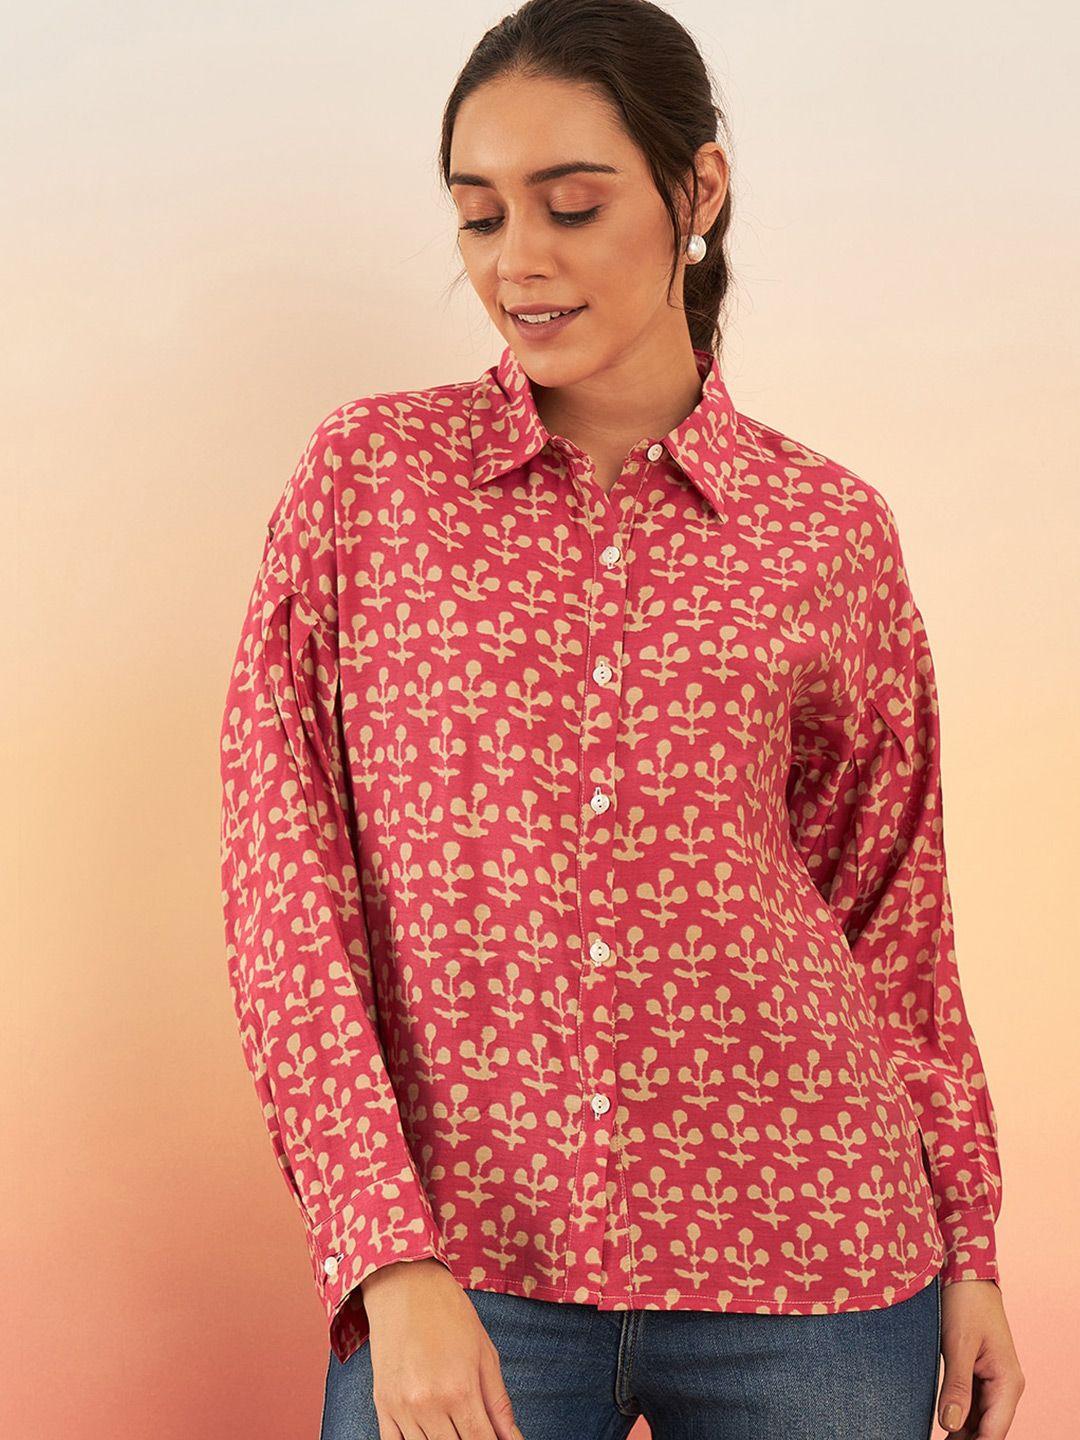 sangria red & off white ethnic motifs printed shirt style top